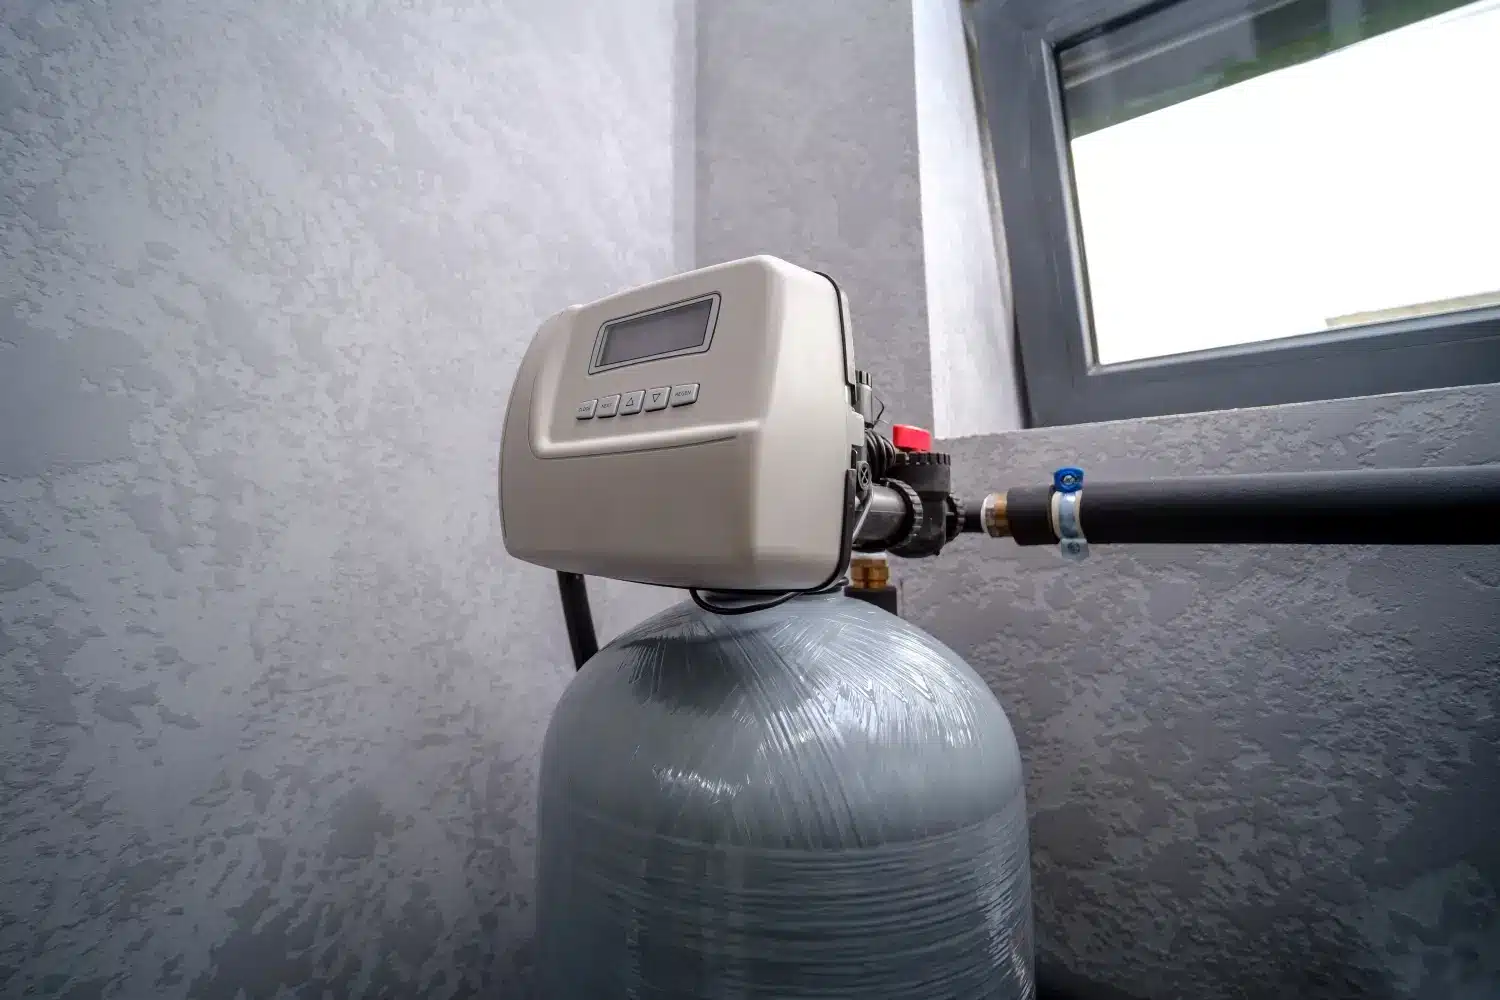 A home water softener unit installed indoors with pipes connected, positioned near a window, offers the myriad benefits of water softeners for your entire household.